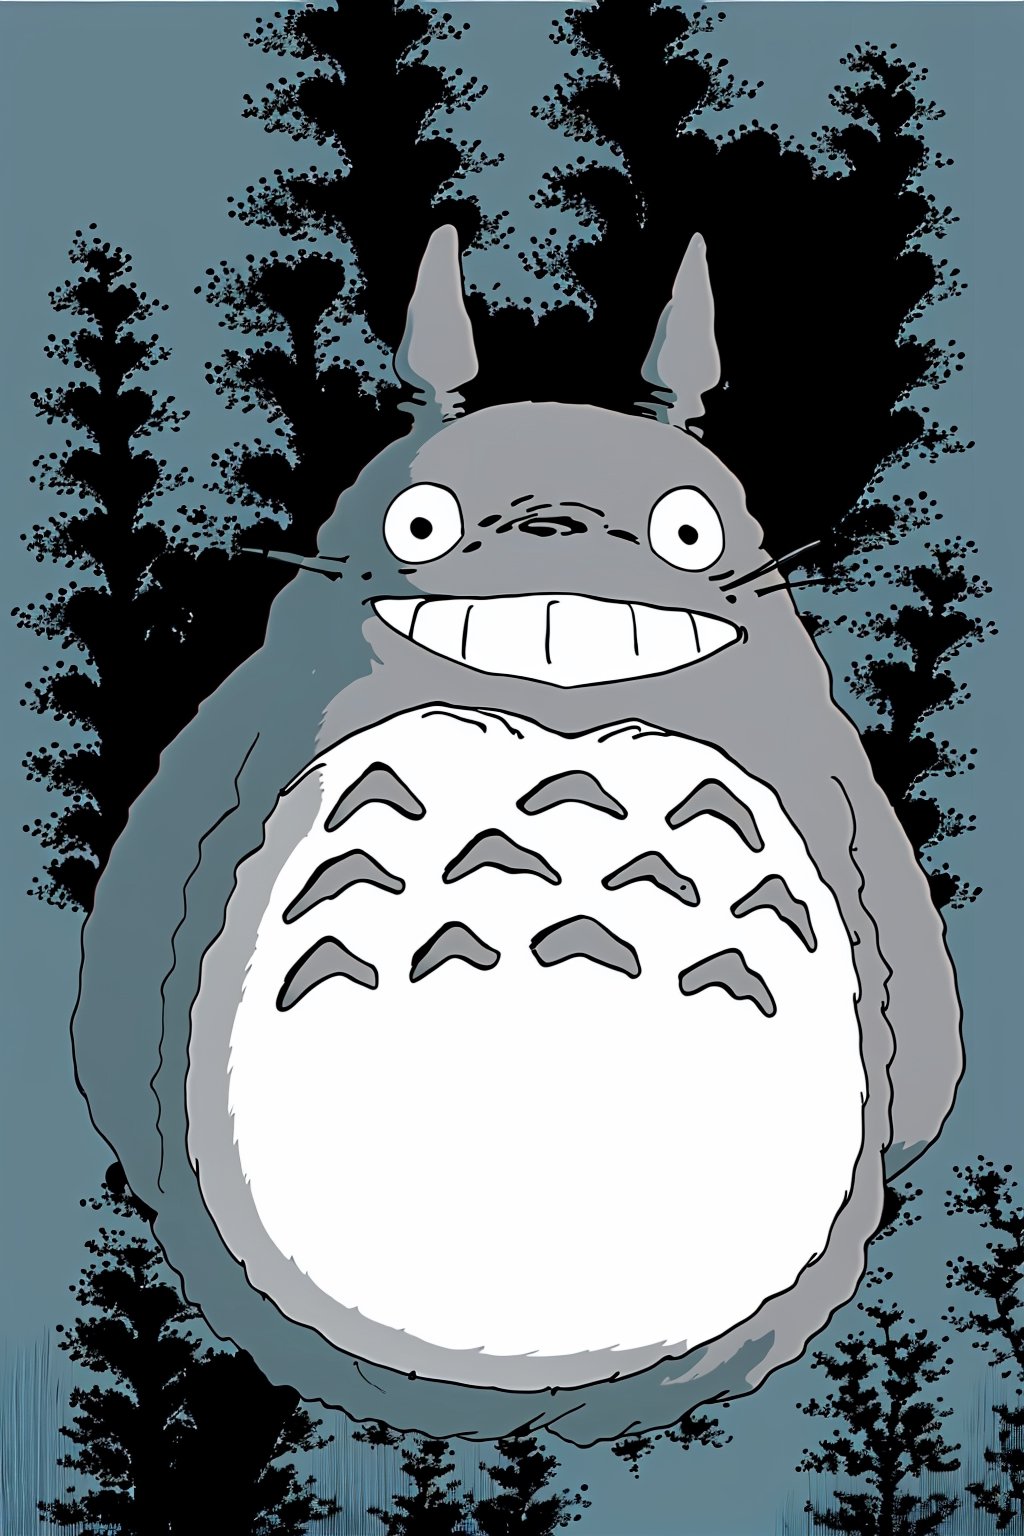 totoro smiling ,black and white,creepy, terror,
opening your mouth